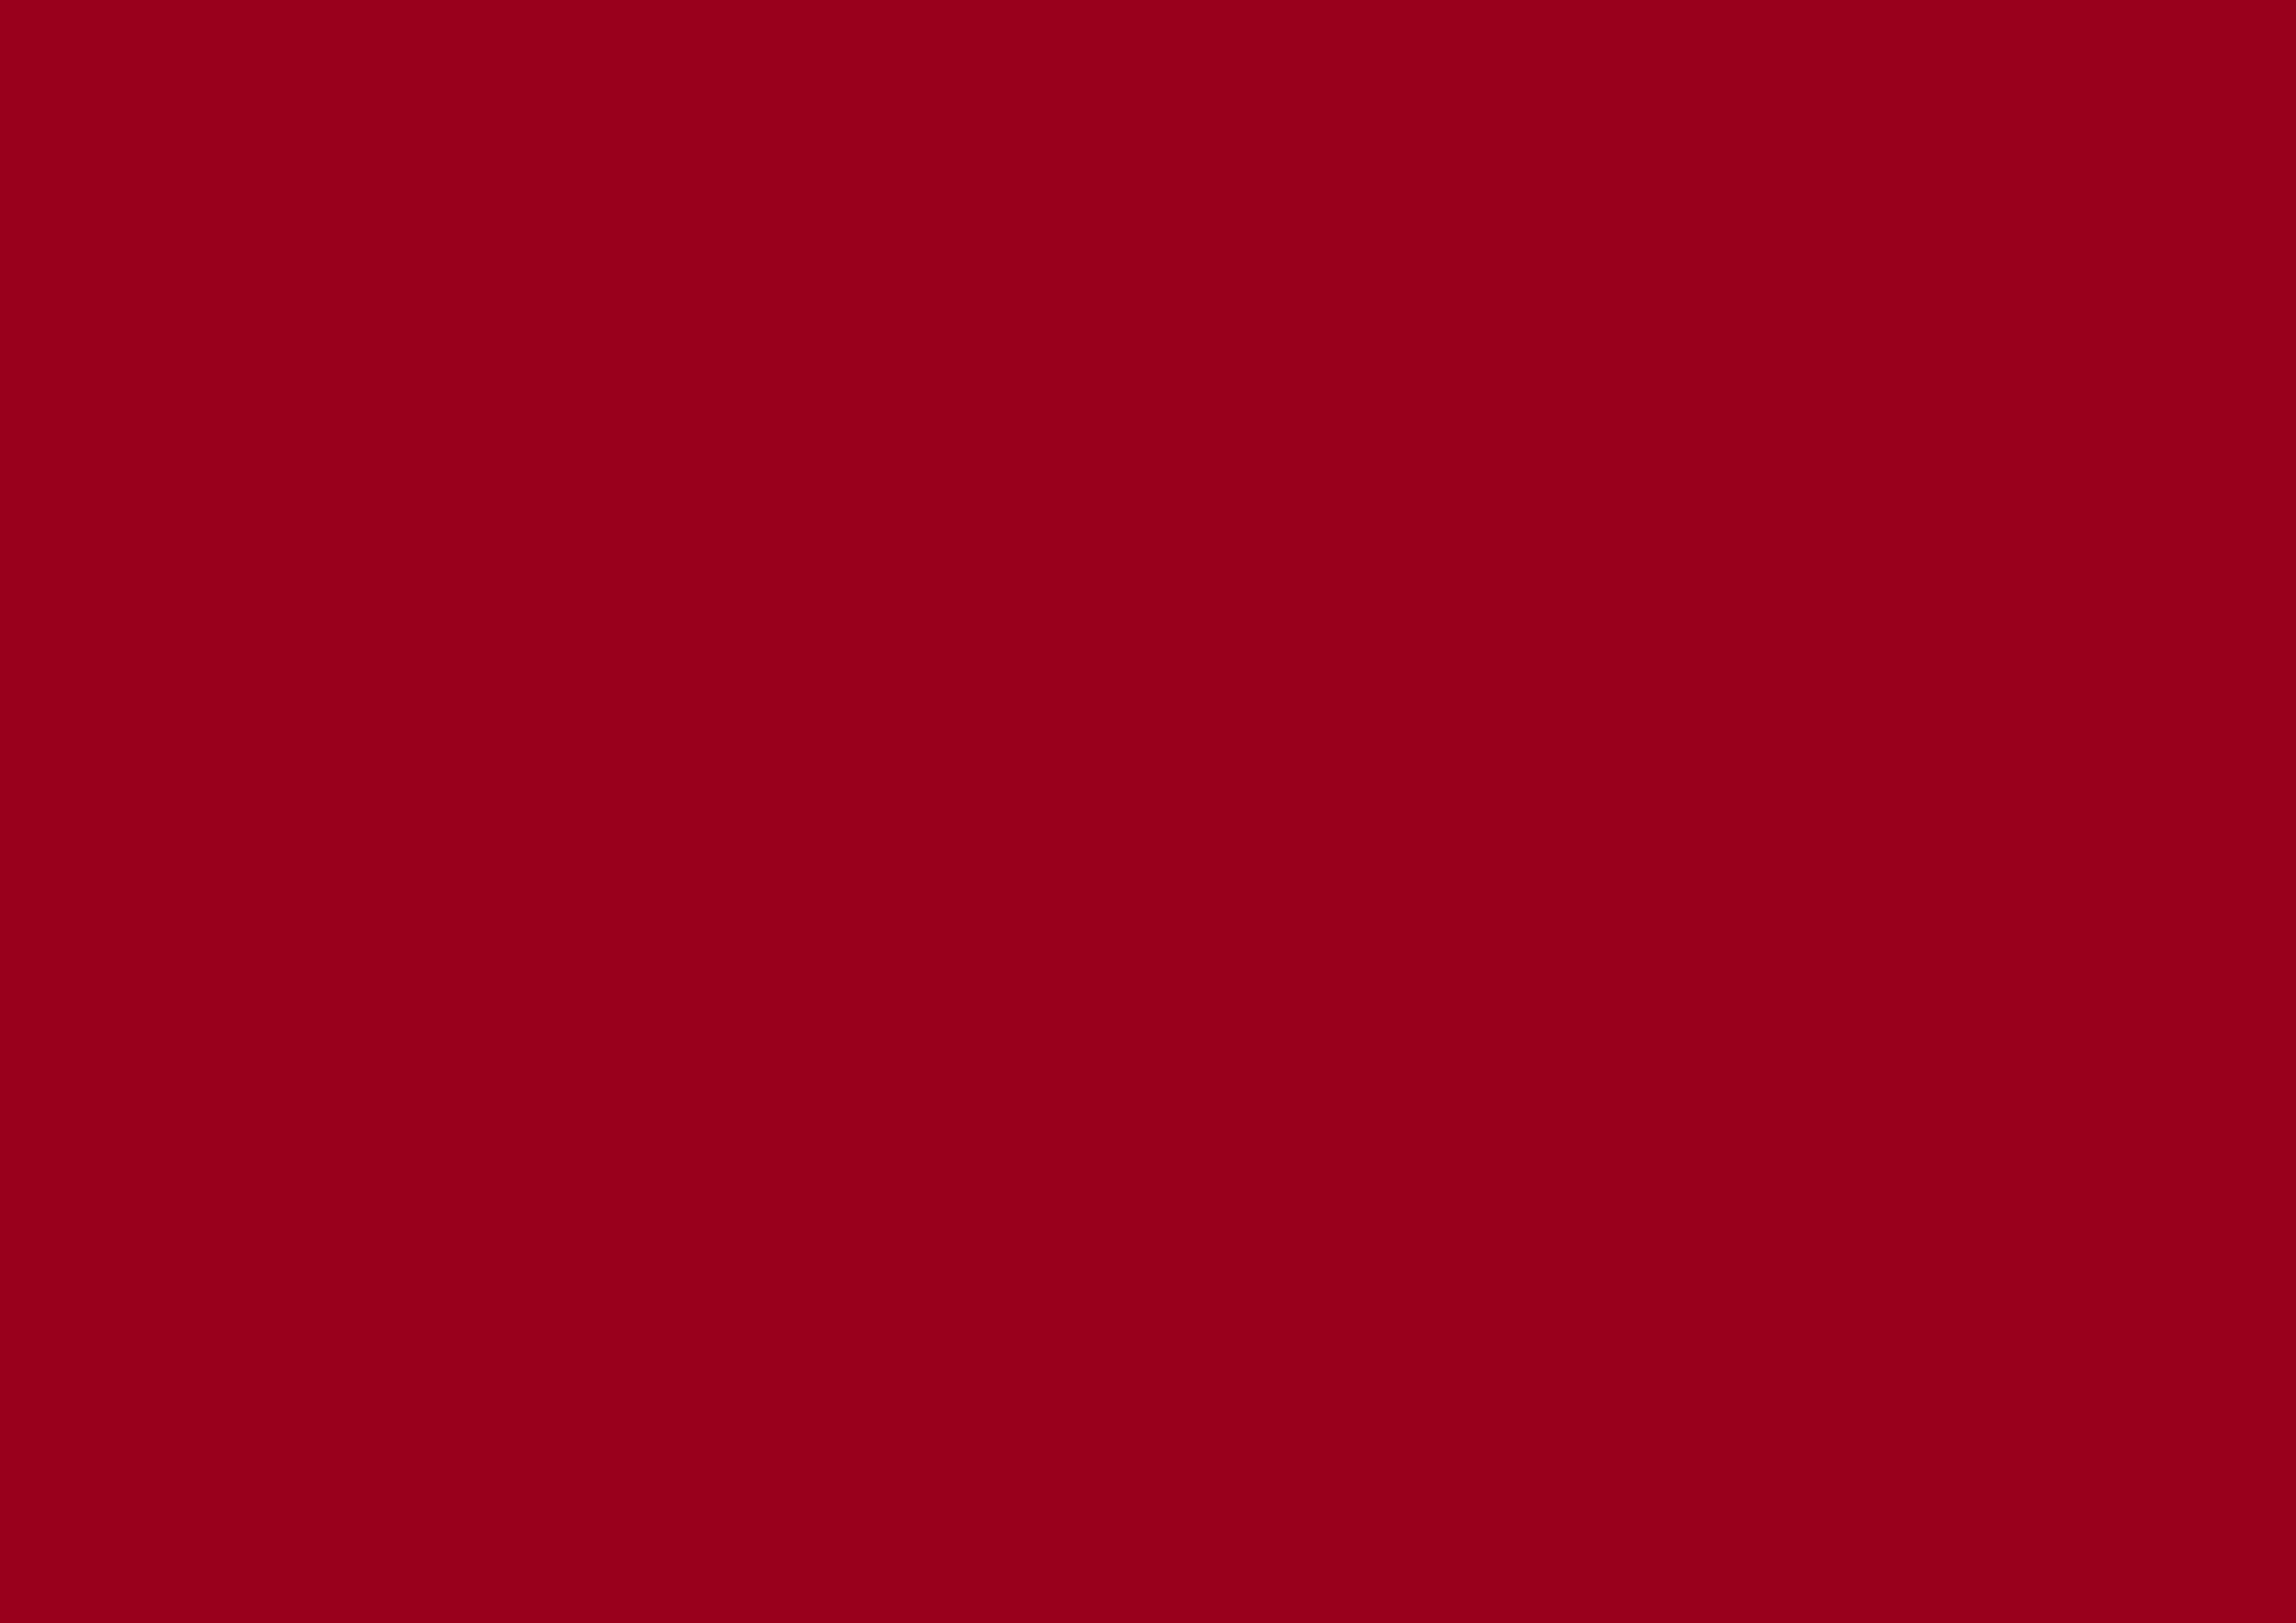 3508x2480 Carmine Solid Color Background